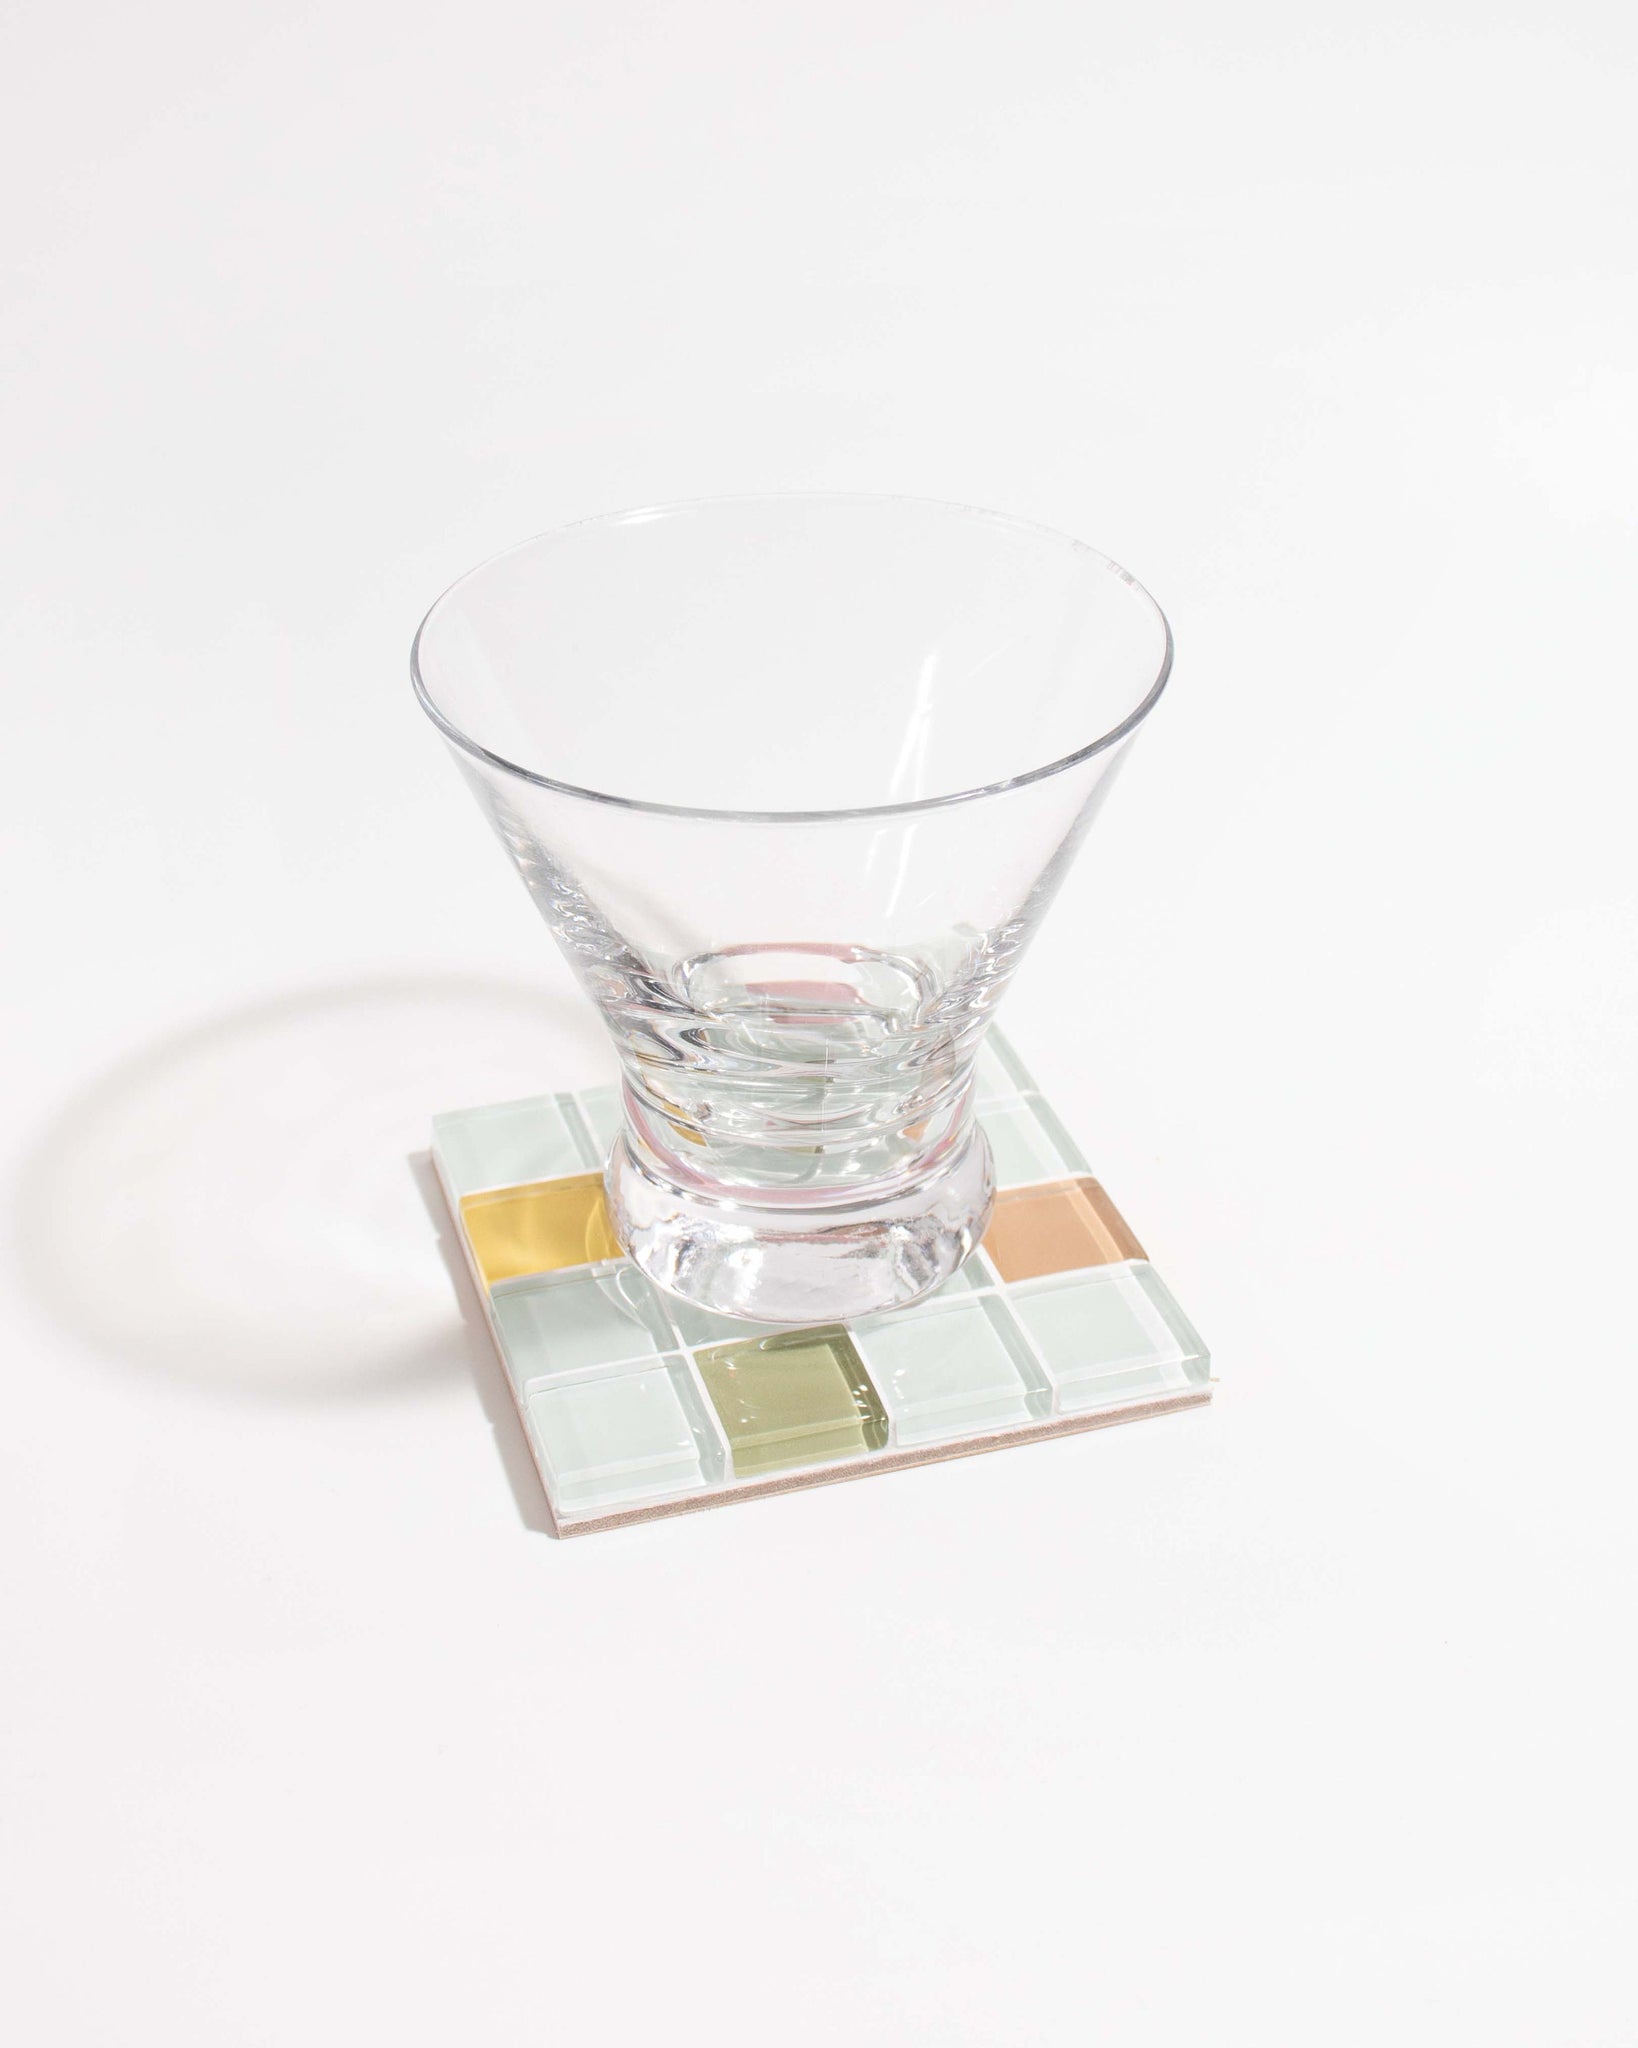 Glass Tile Coaster | Handmade Drink Coaster | Square Coaster | Housewarming Gift | Gift for Her | Christmas Gifts | Thanksgiving Gifts